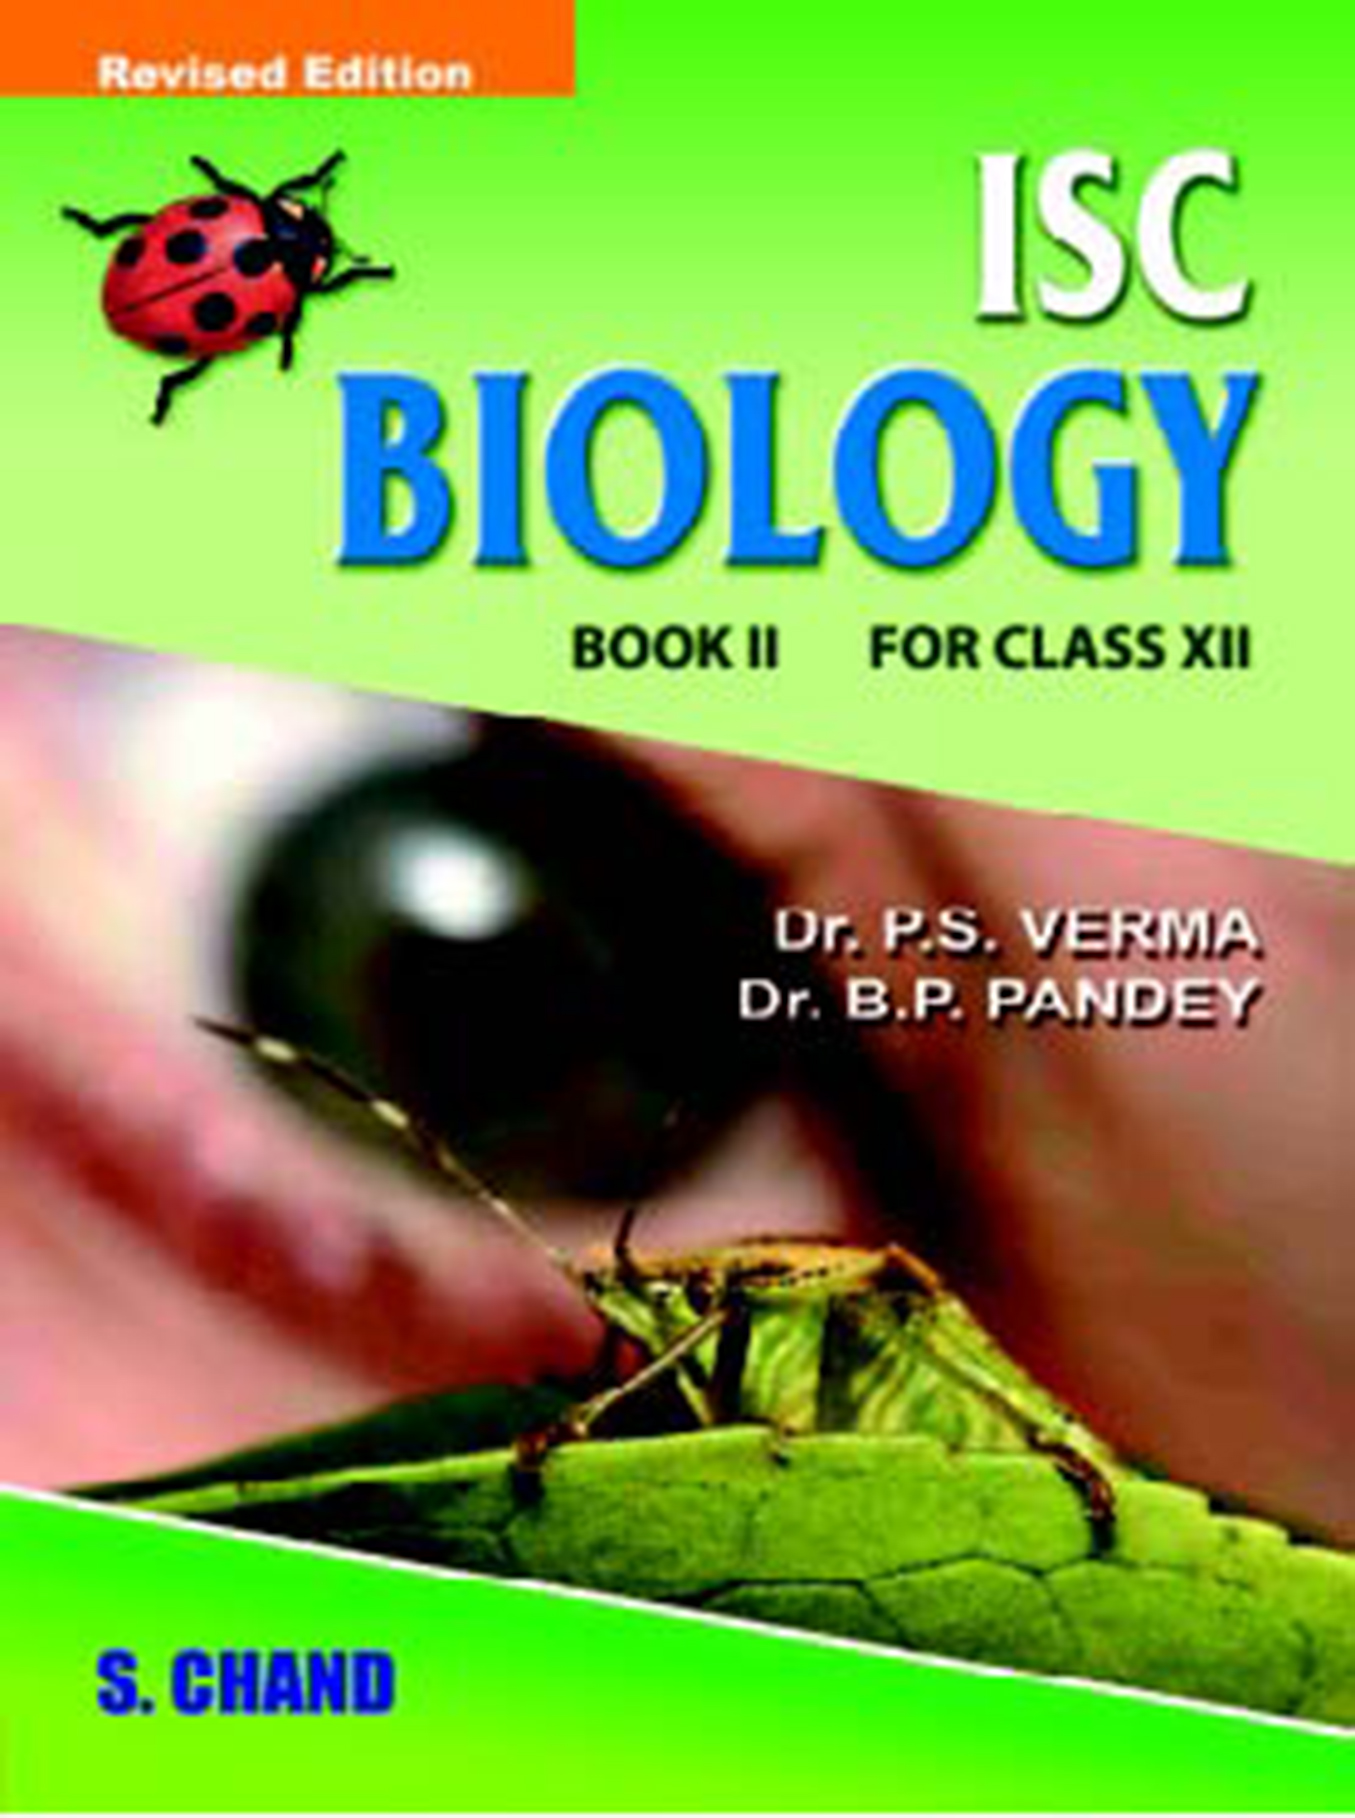 Isc Biology Book Ii For Class Xii By Dr P S Verma